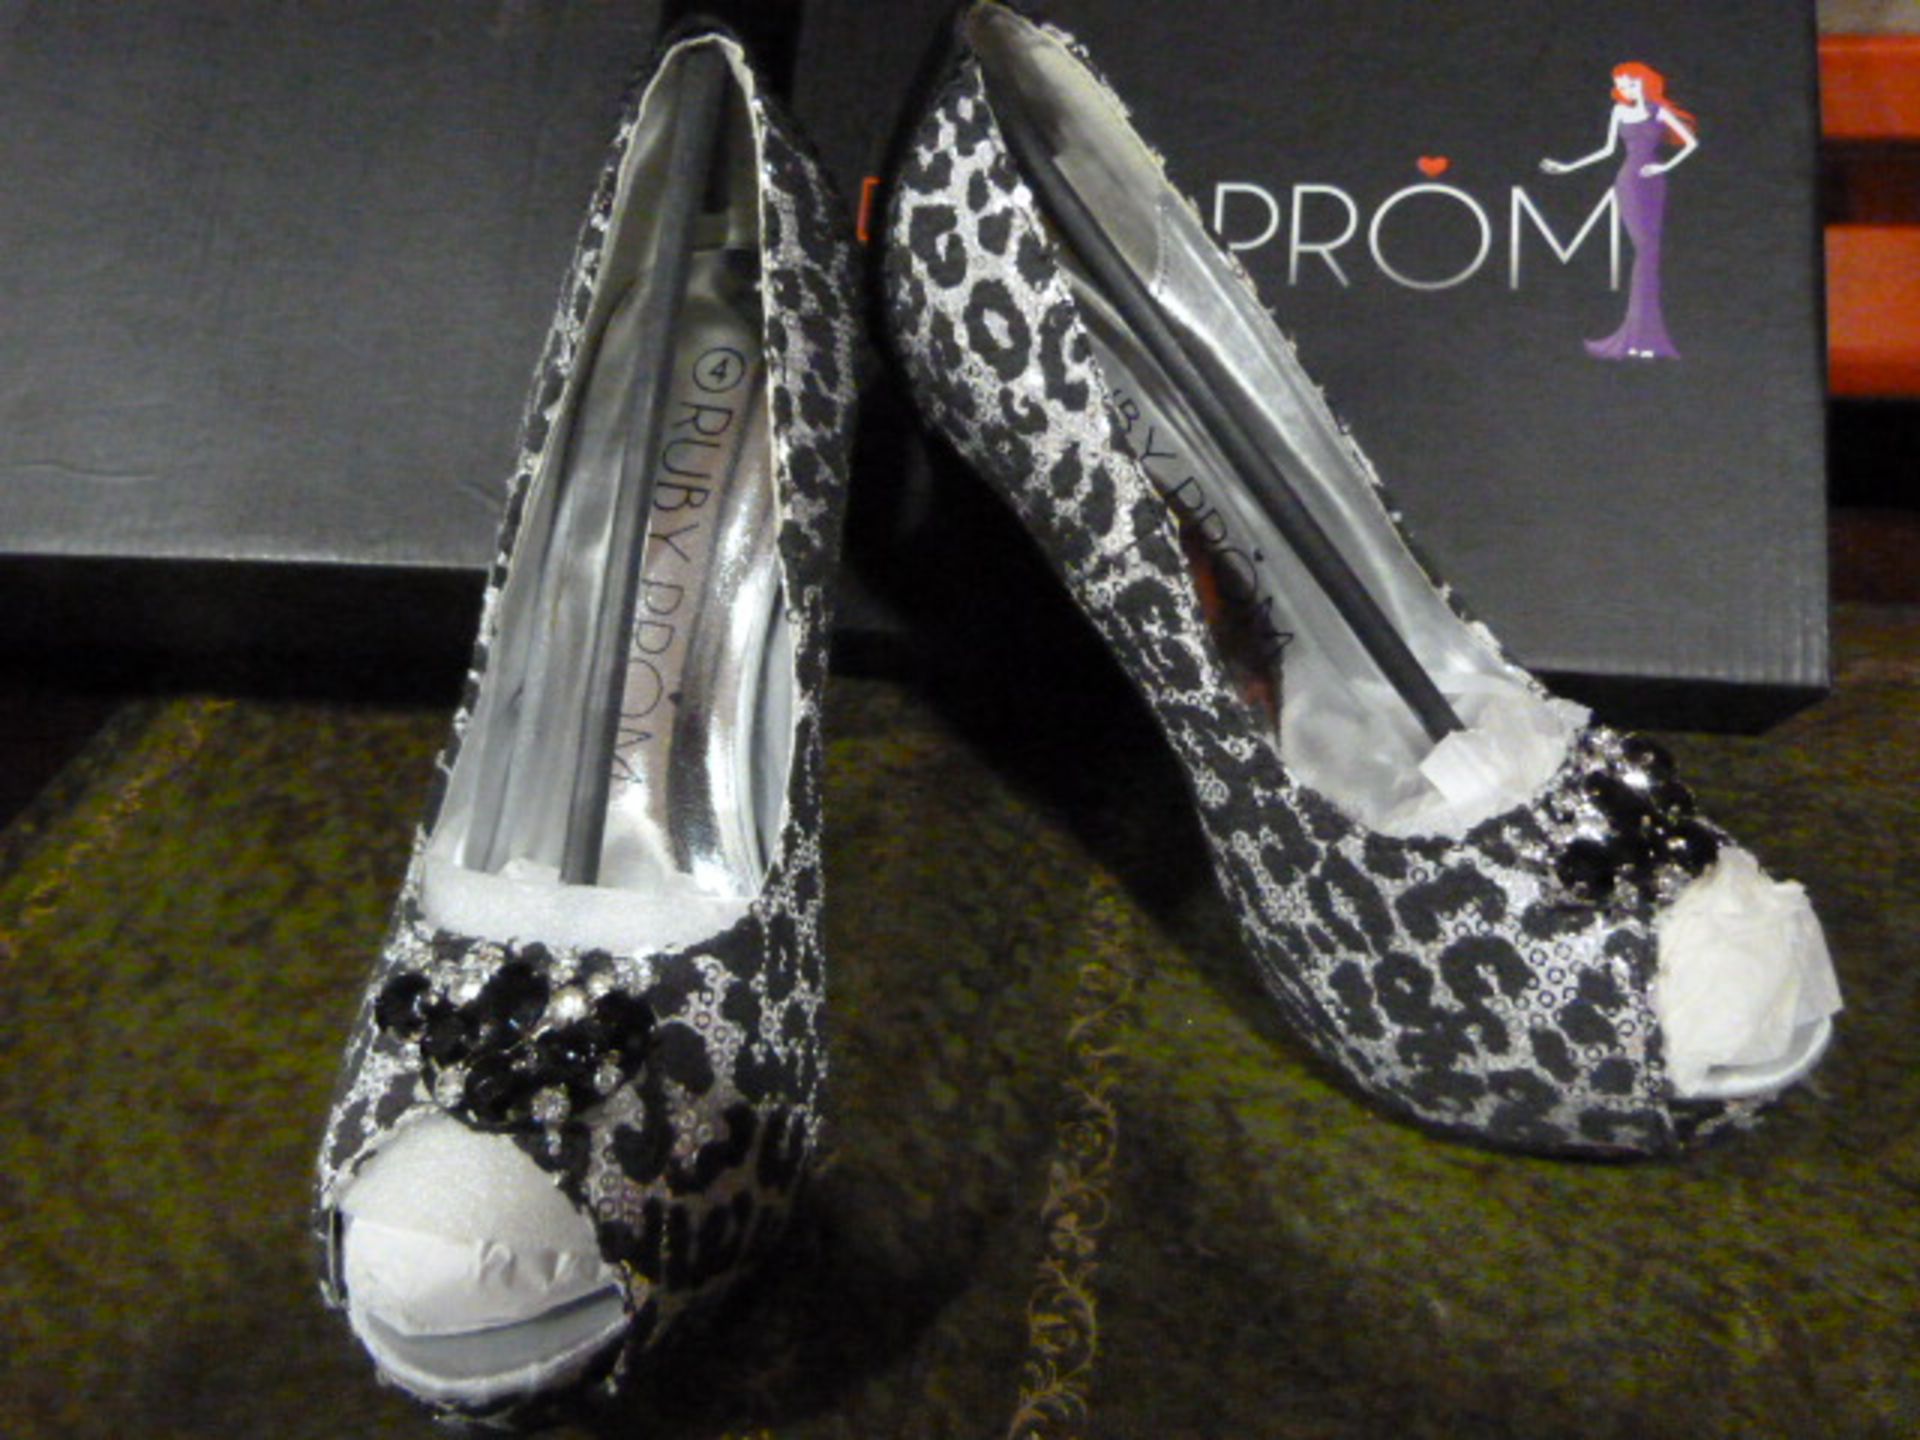 *Six Pairs of Ruby Prom "Tailor" Black Prom Shoes